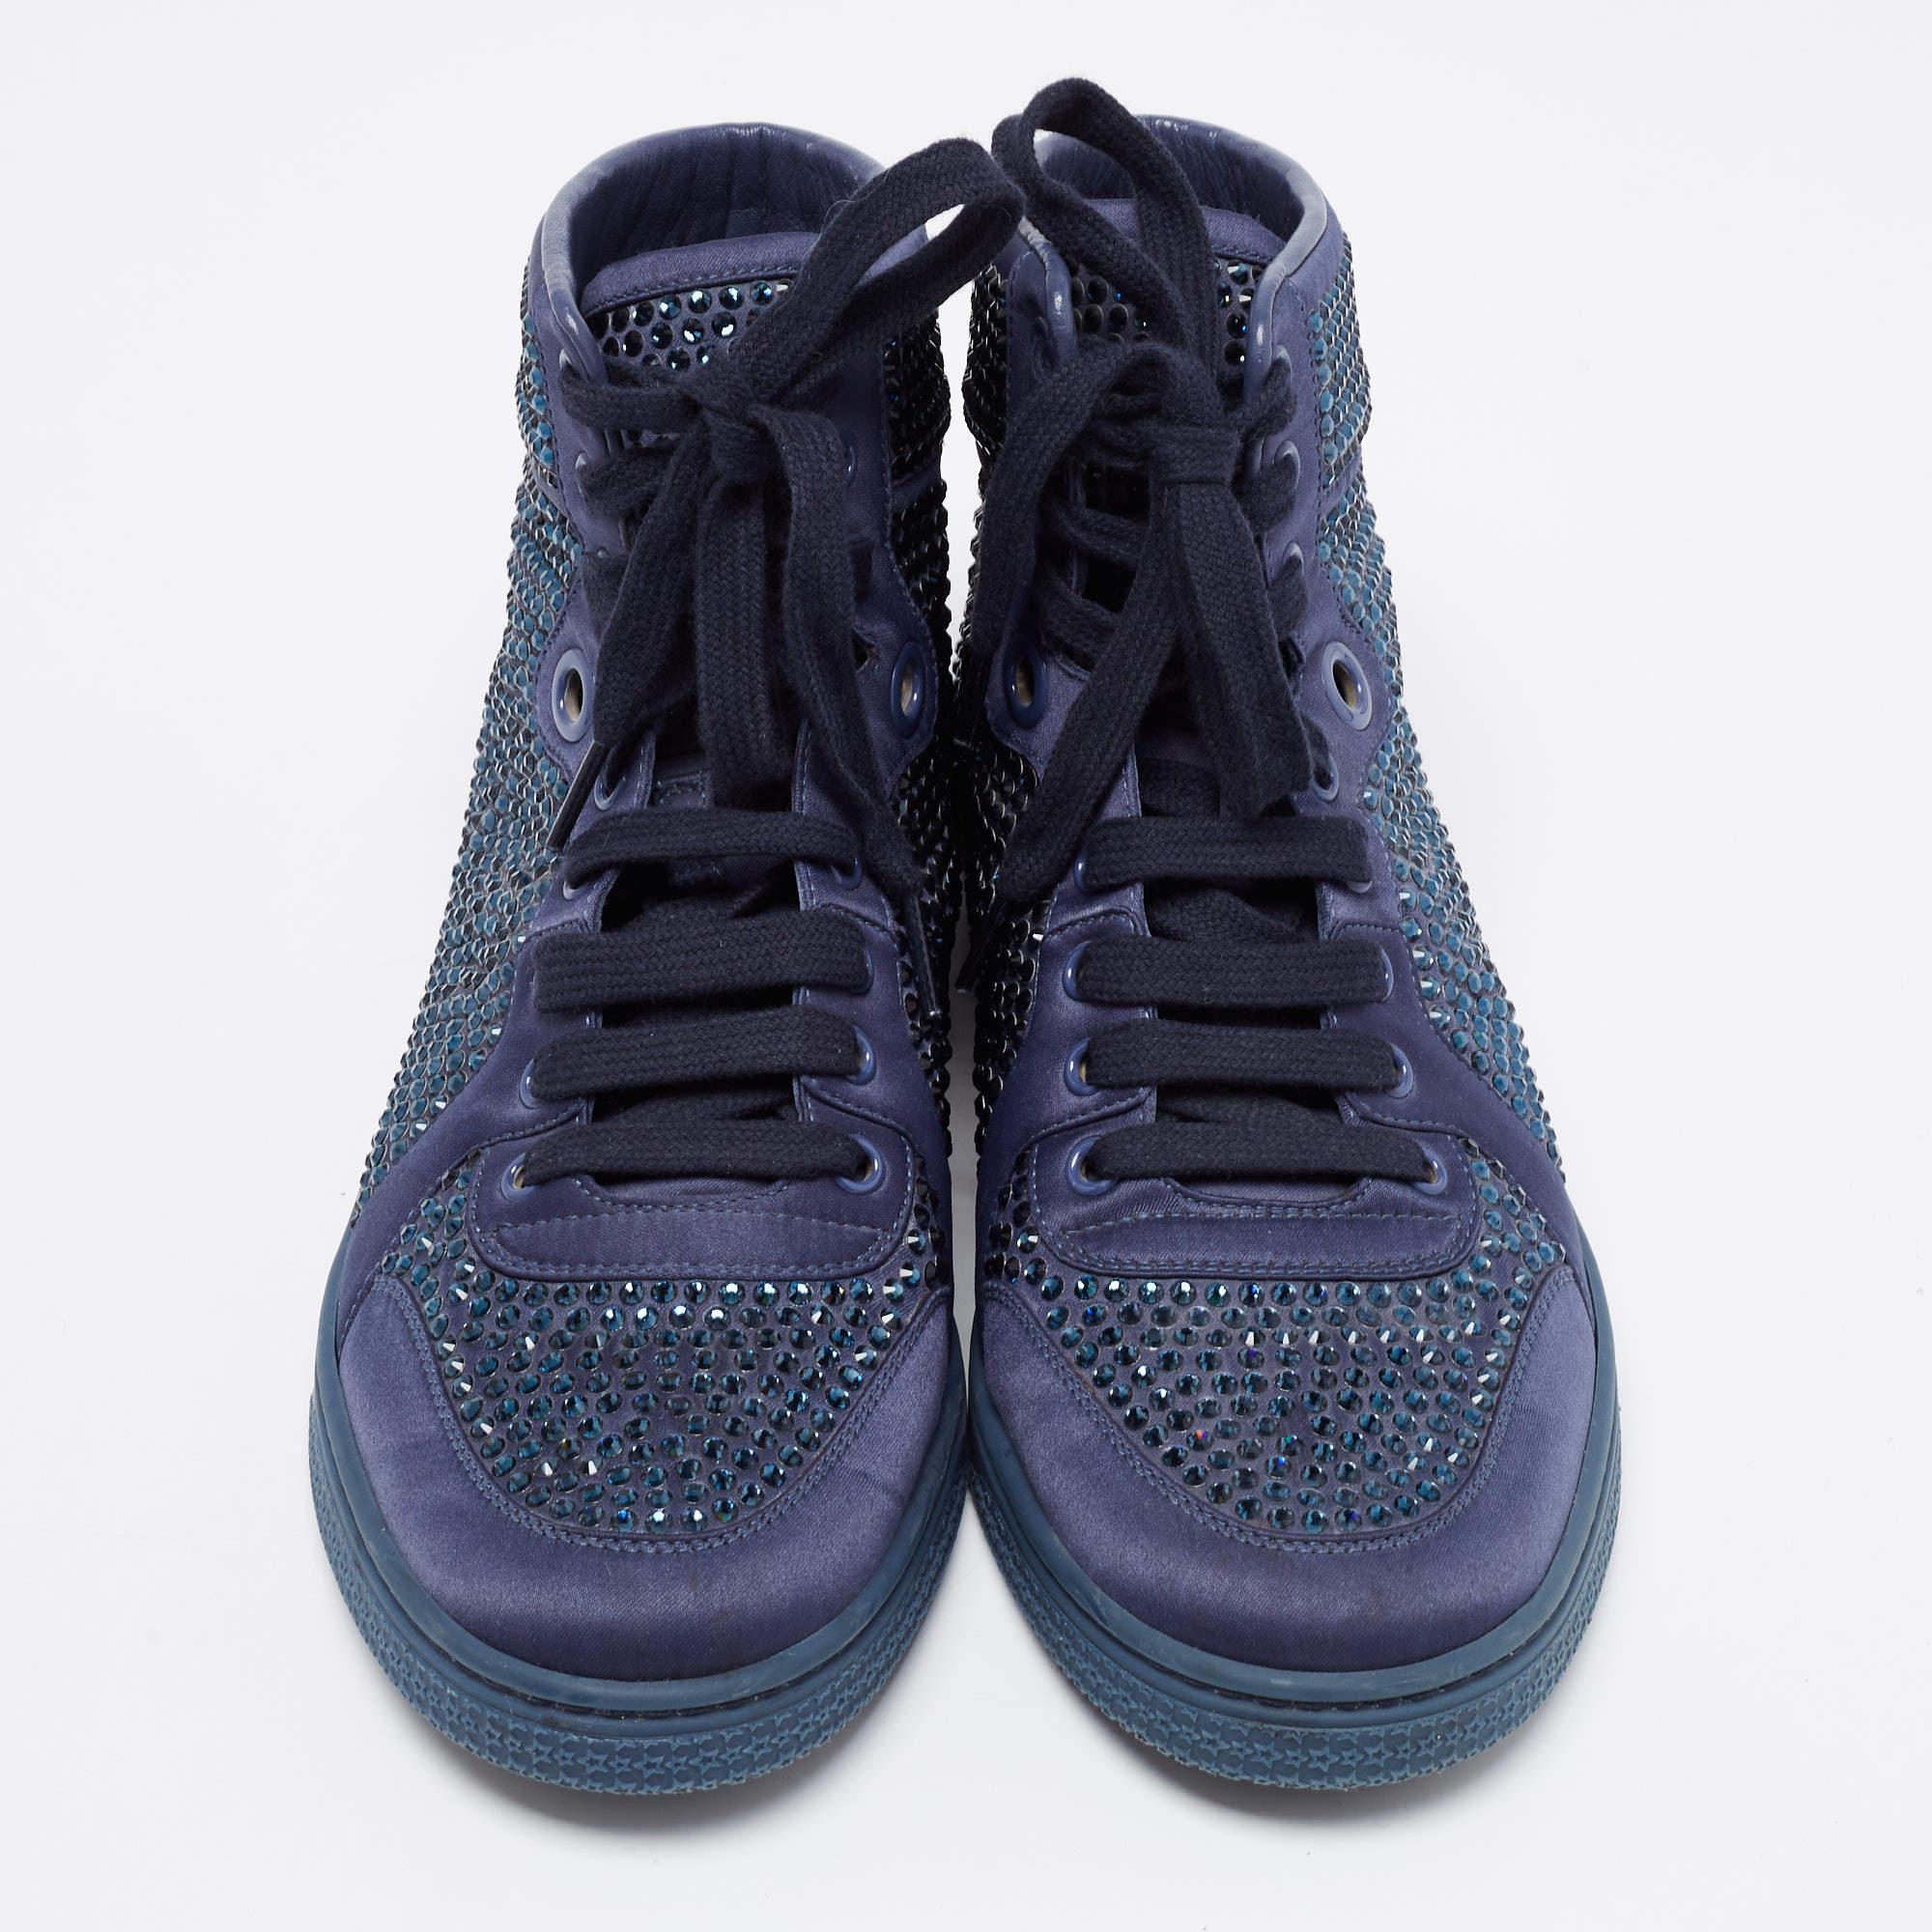 Coming in a high-top silhouette, these Gucci sneakers are a seamless combination of luxury, comfort, and style. They are made from satin in a blue shade and accented with crystals all over the exterior. These sneakers are designed with round-toes,